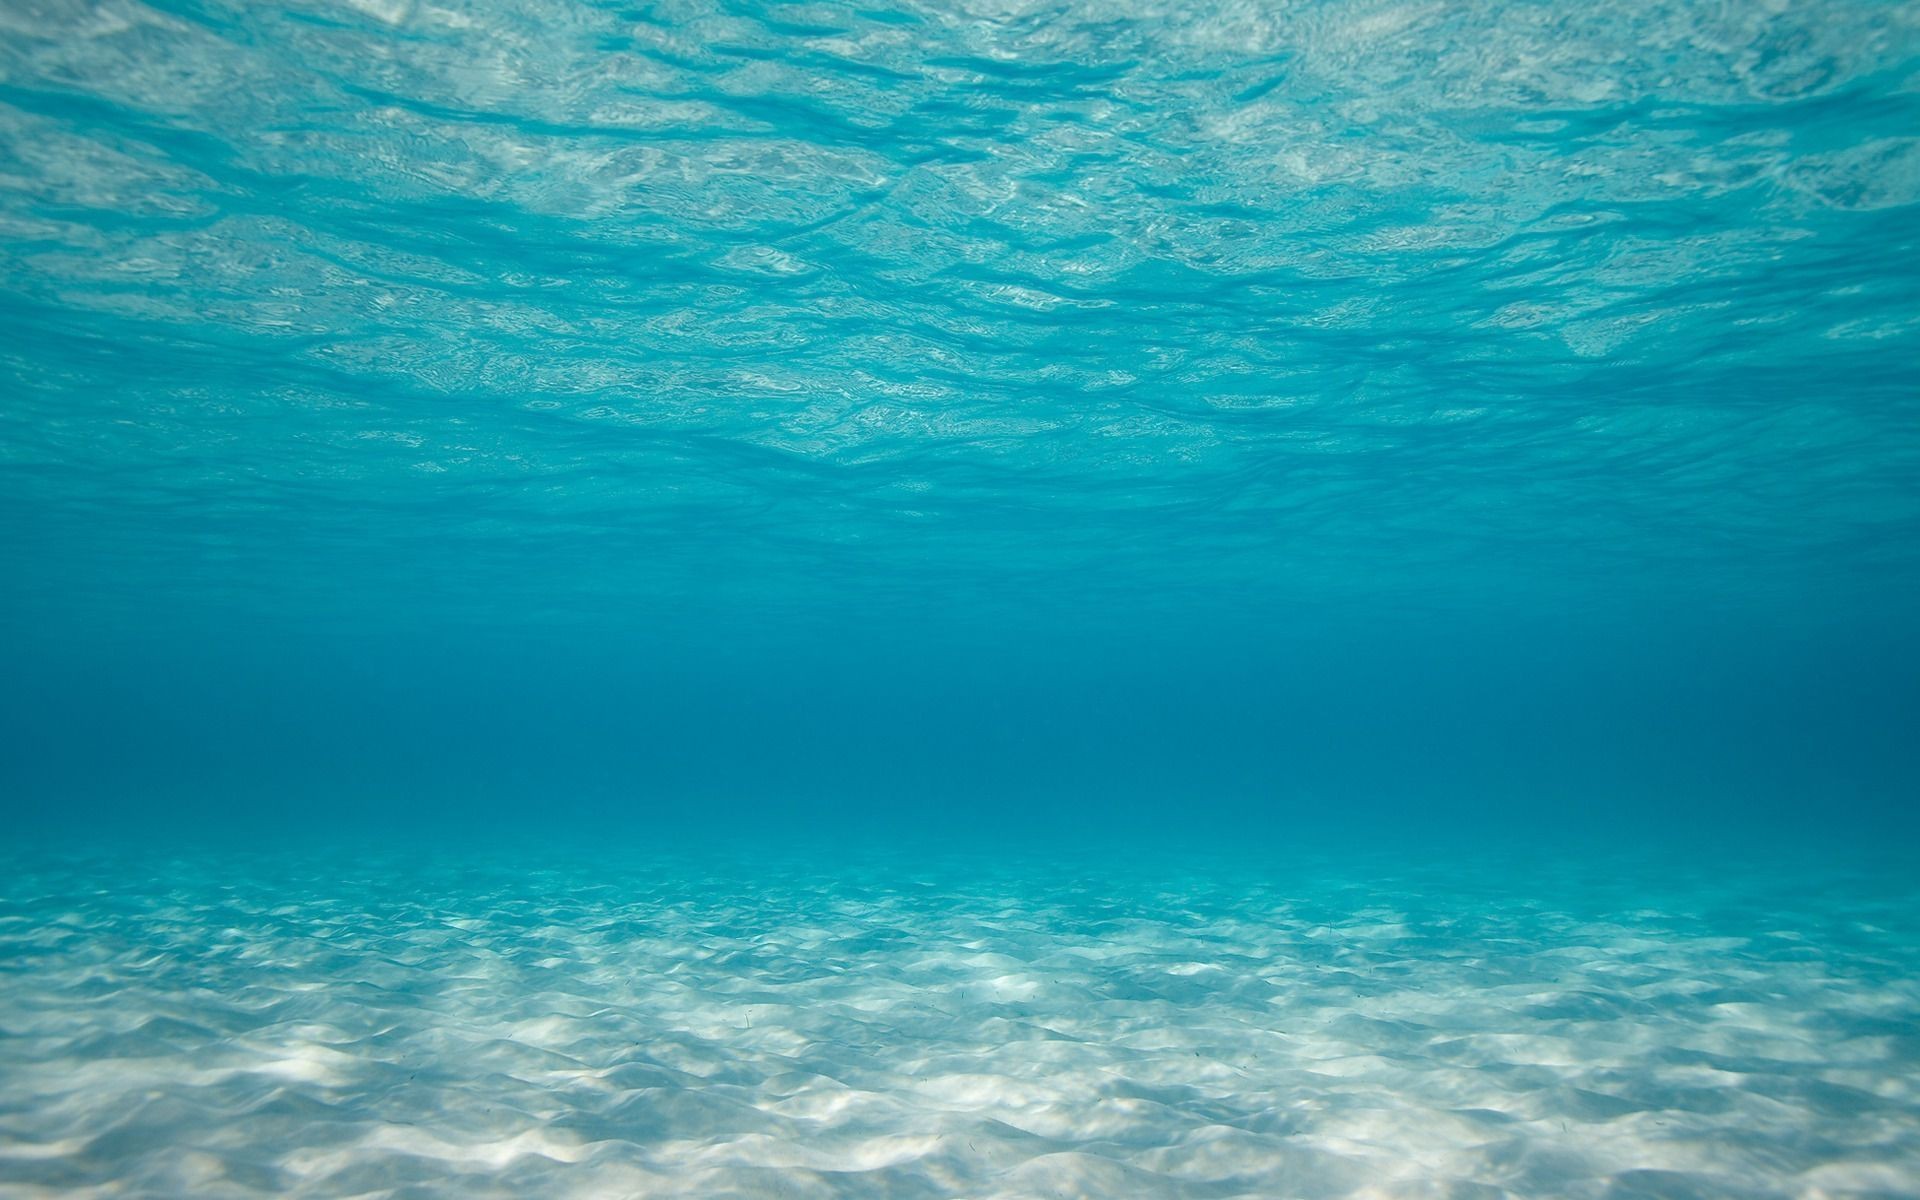 121678-widescreen-under-the-sea-background-1920x1200.jpg -  by Maria Angelopoulos Photogrpahy